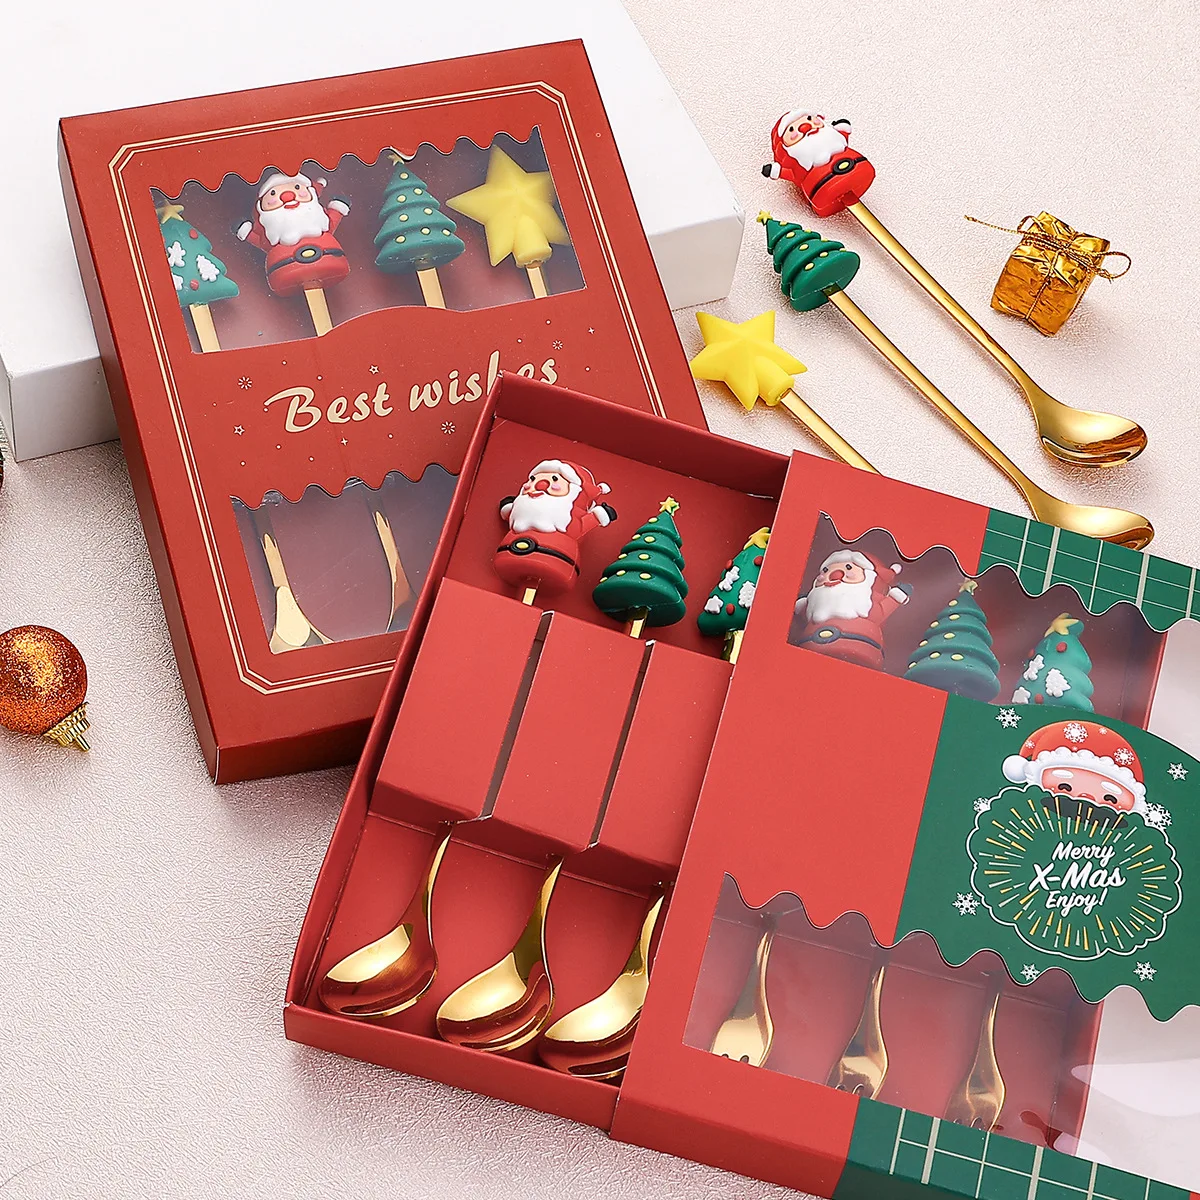 4 Christmas PVC Doll 410 and 304 Stainless Steel Spoon Tableware Set Dessert Coffee Spoon Fruit Fork Christmas Tree Gift Box